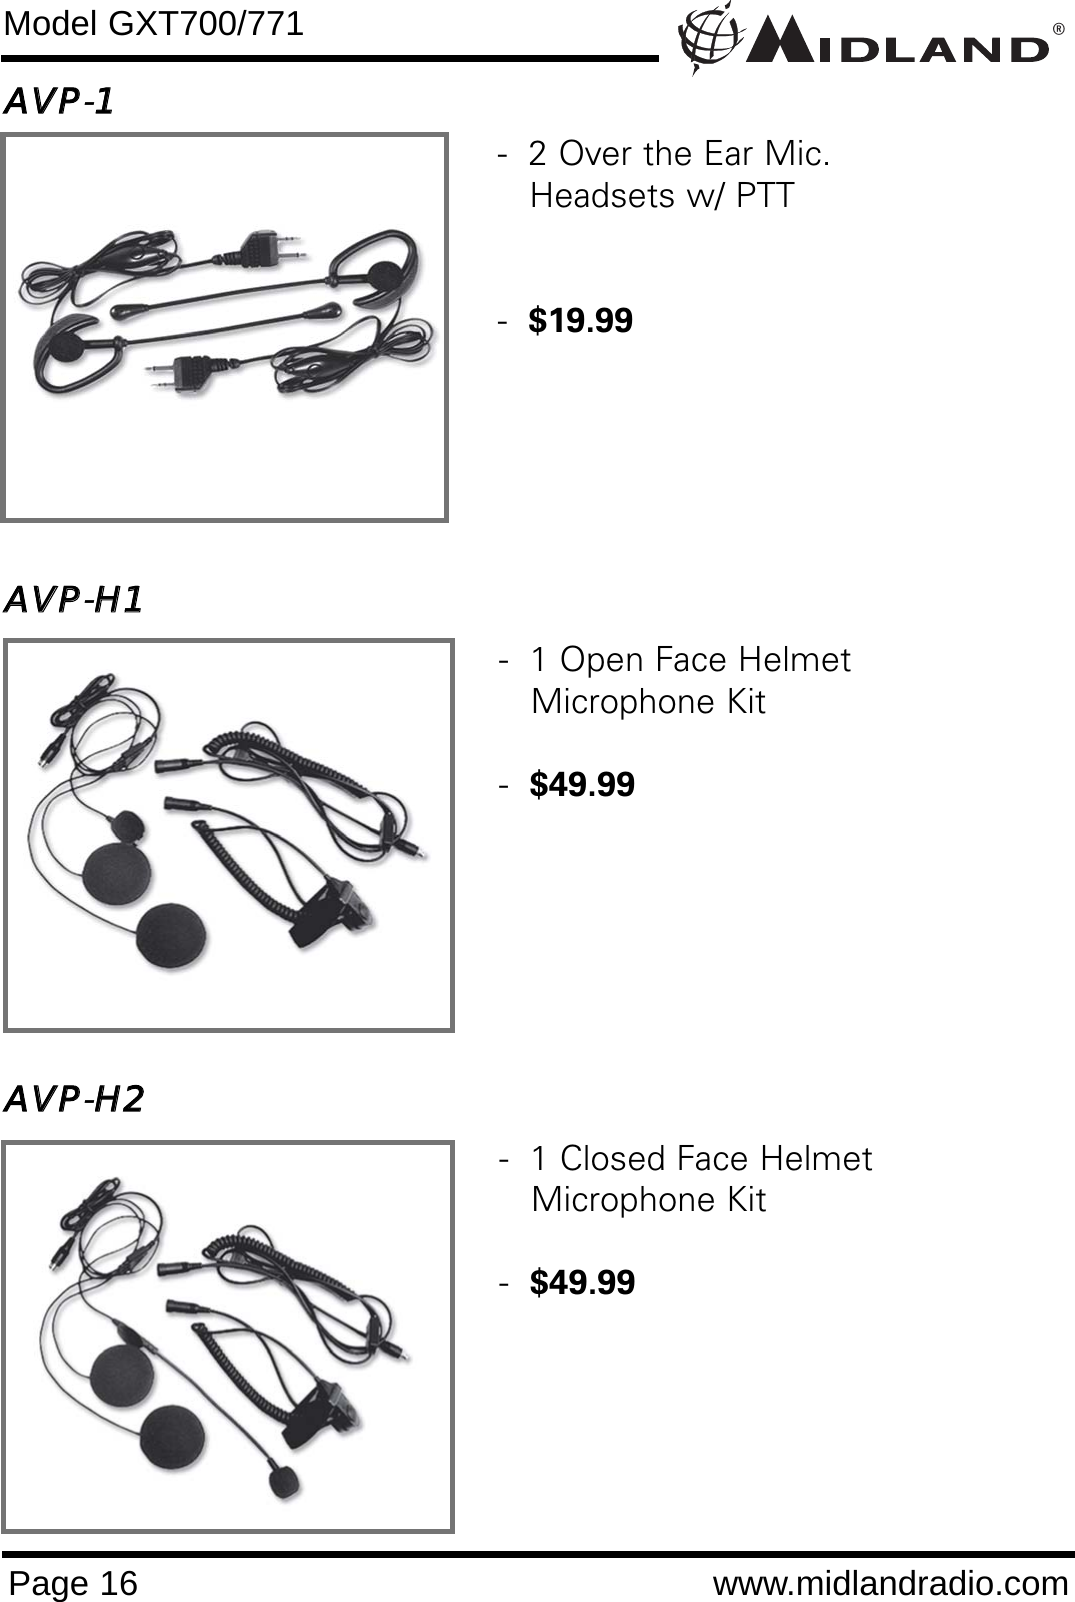 AAVVPP-11AAVVPP-HH11AAVVPP-HH22®Page 16 www.midlandradio.comModel GXT700/771-  1 Open Face Helmet Microphone Kit-  $49.99-  1 Closed Face HelmetMicrophone Kit-  $49.99-  2 Over the Ear Mic. Headsets w/ PTT-  $19.99